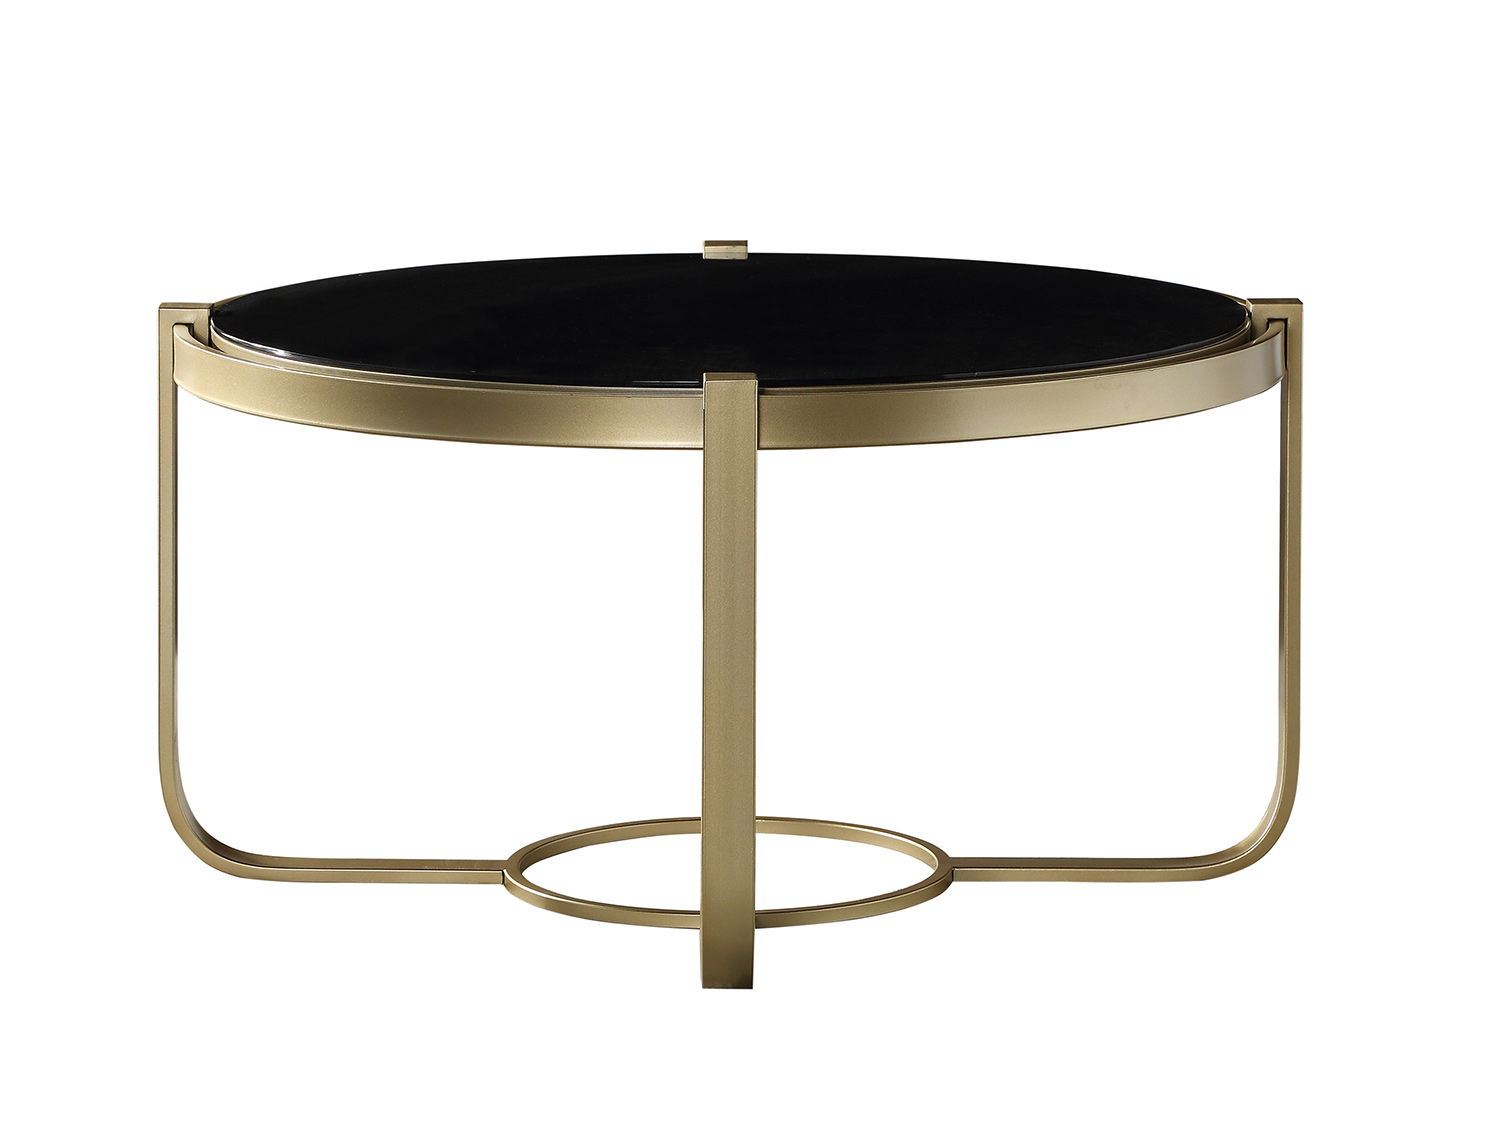 Homelegance Caracal Round Cocktail Table with Black Glass Insert - Gold